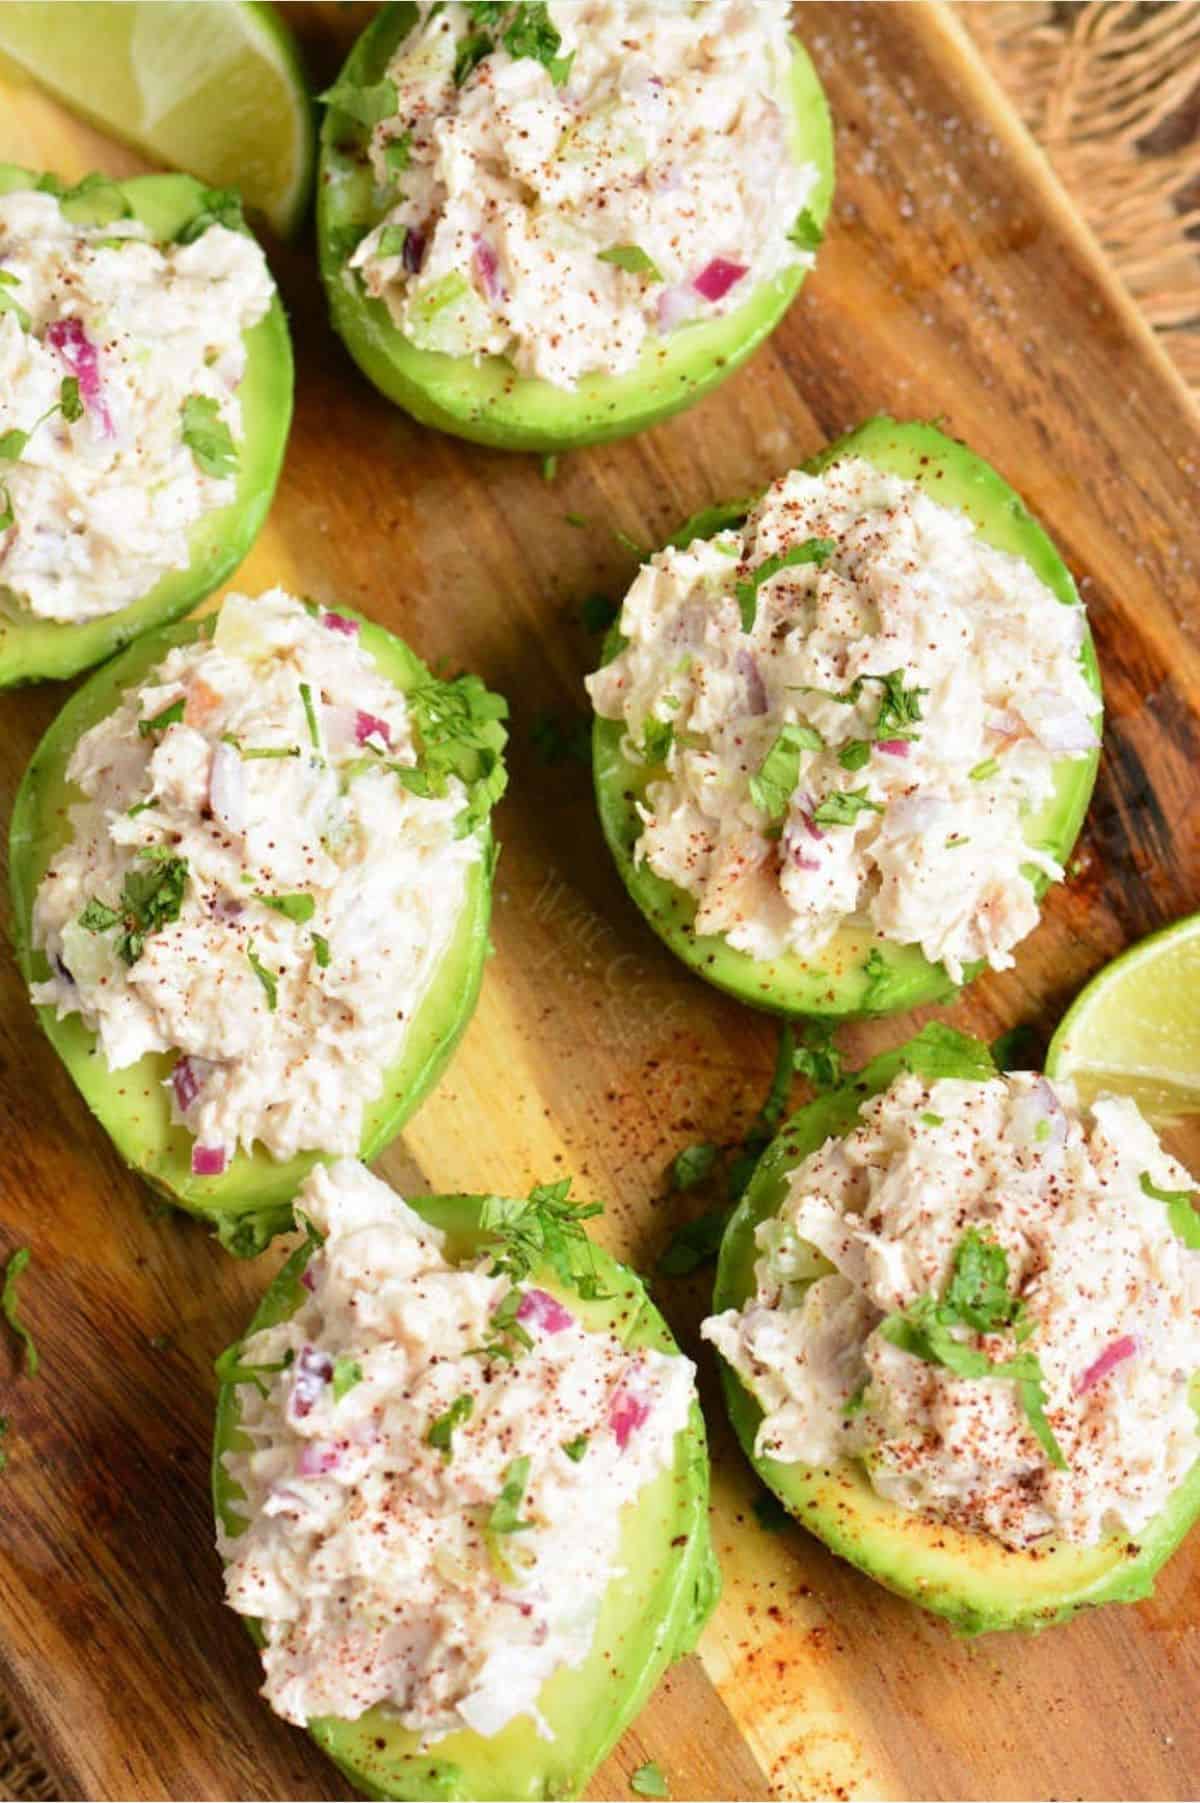 six stuffed avocado halves topped with chicken salad on the wooden board.